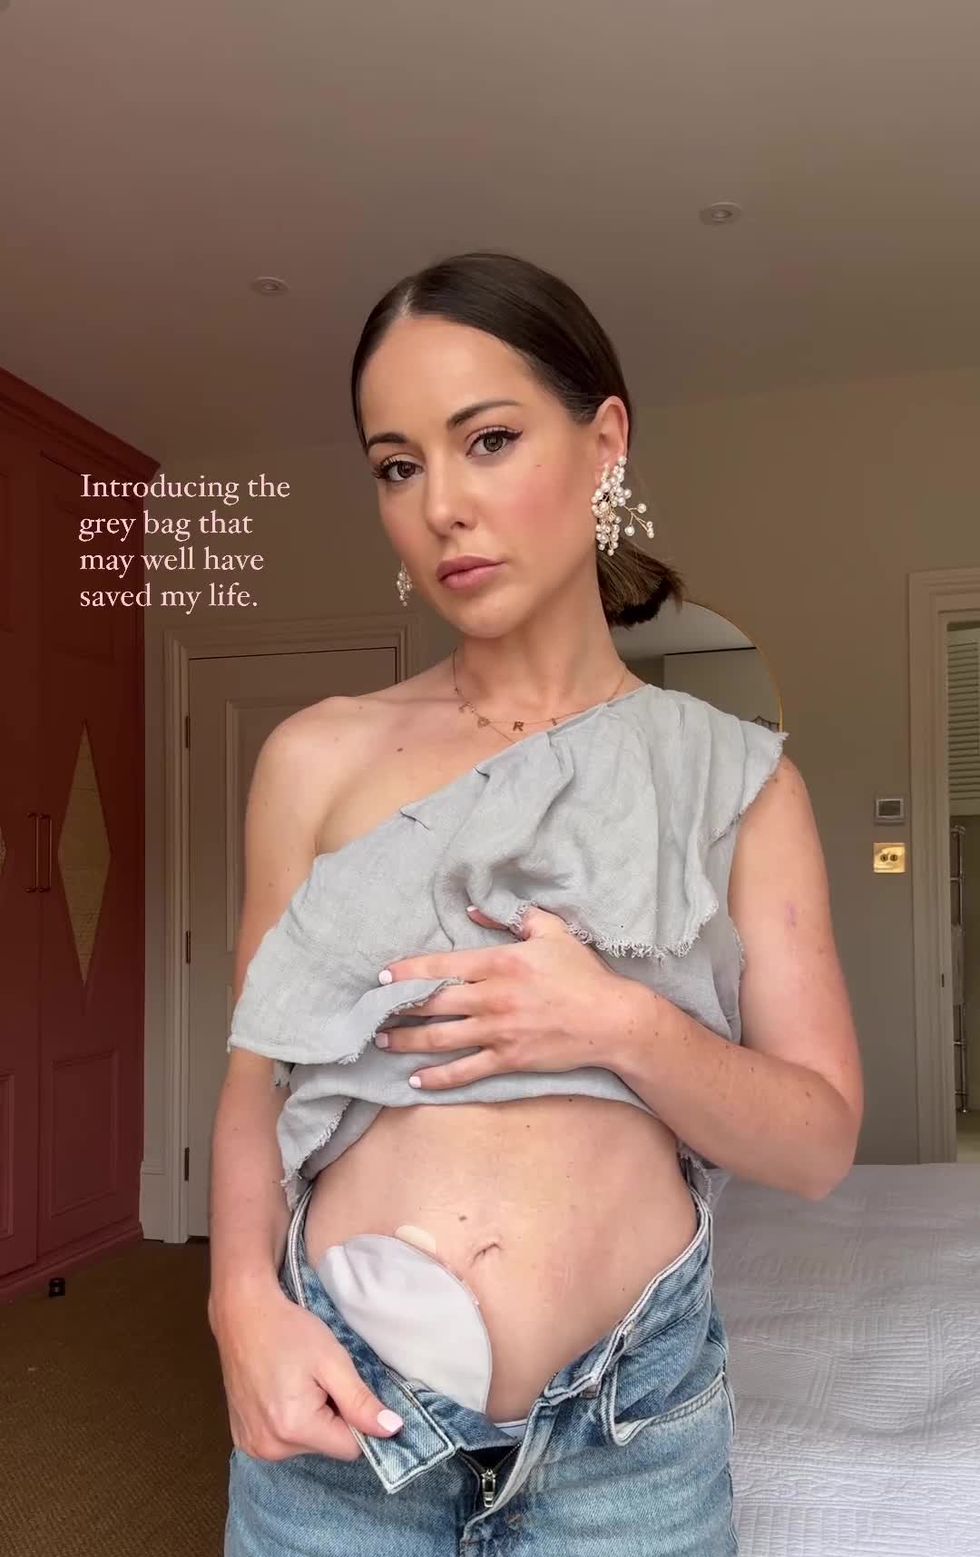 louise thompson shows off her stoma bag for the first time